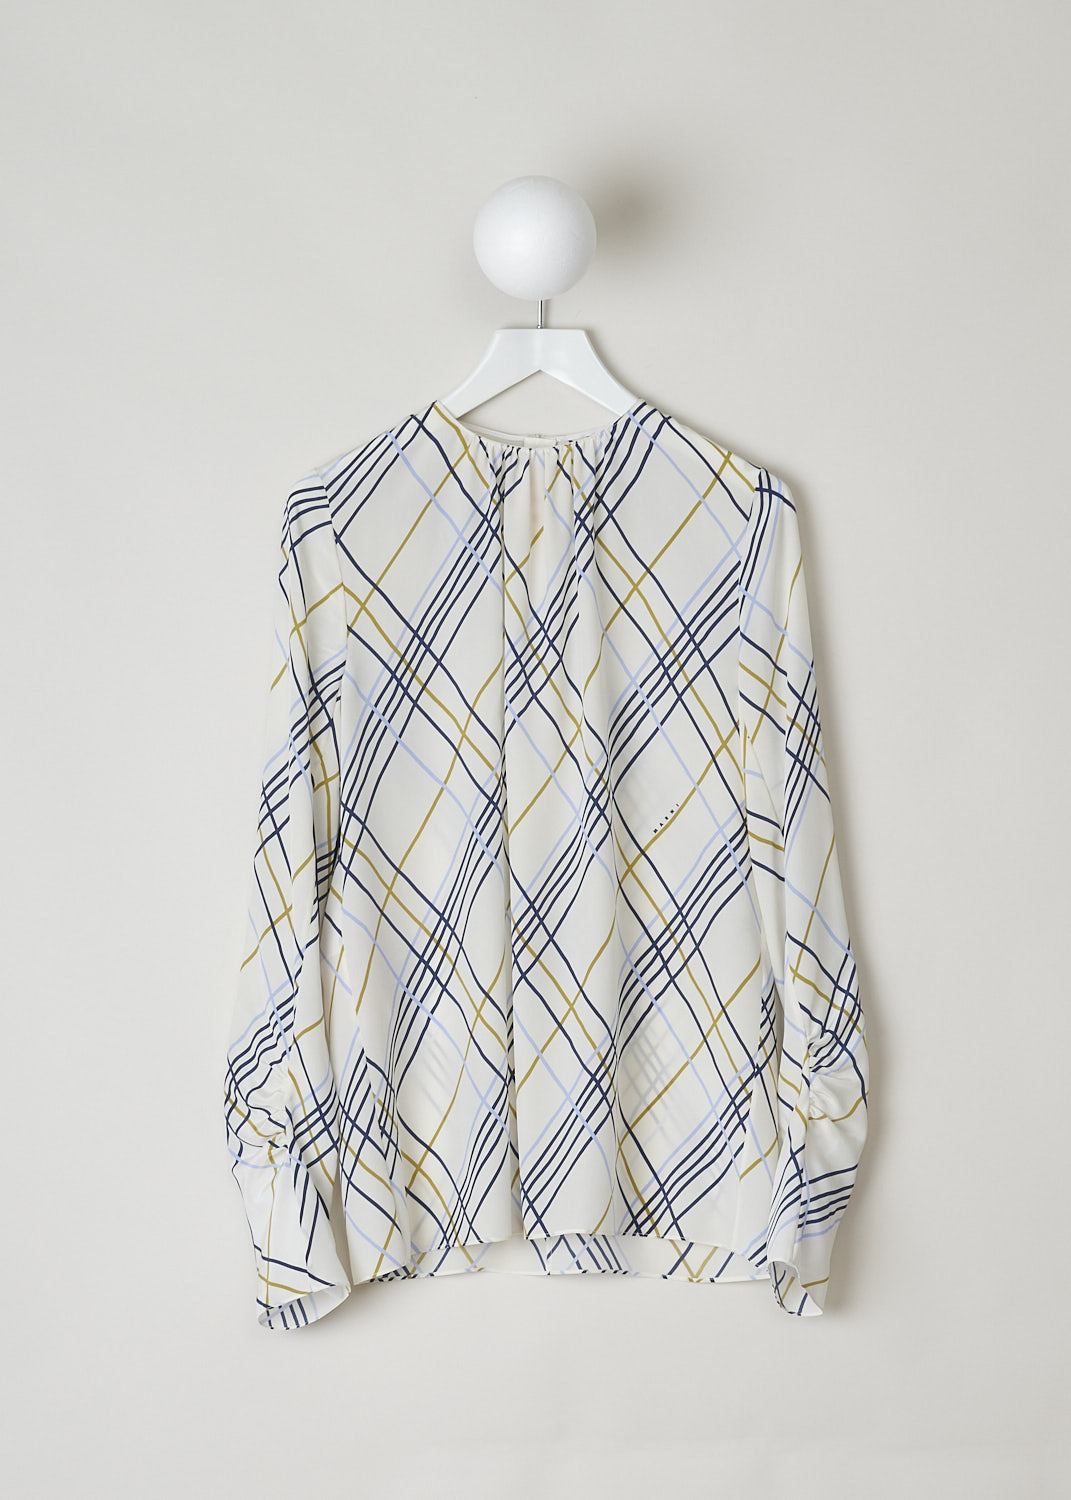 MARNI, SILK CROSS STRIPED TOP, CAMA0519A0_UTSF88_WRW06, White, Print, Blue, Front, This silk top has an off-white base with a colorful criss-cross stripe print. To one side, small Marni logo lettering can be found. The top has a ruched round neckline and that same ruching can be found on the long sleeves. The top has a straight hemline. In the back, a concealed centre zip functions as the closure option. 
